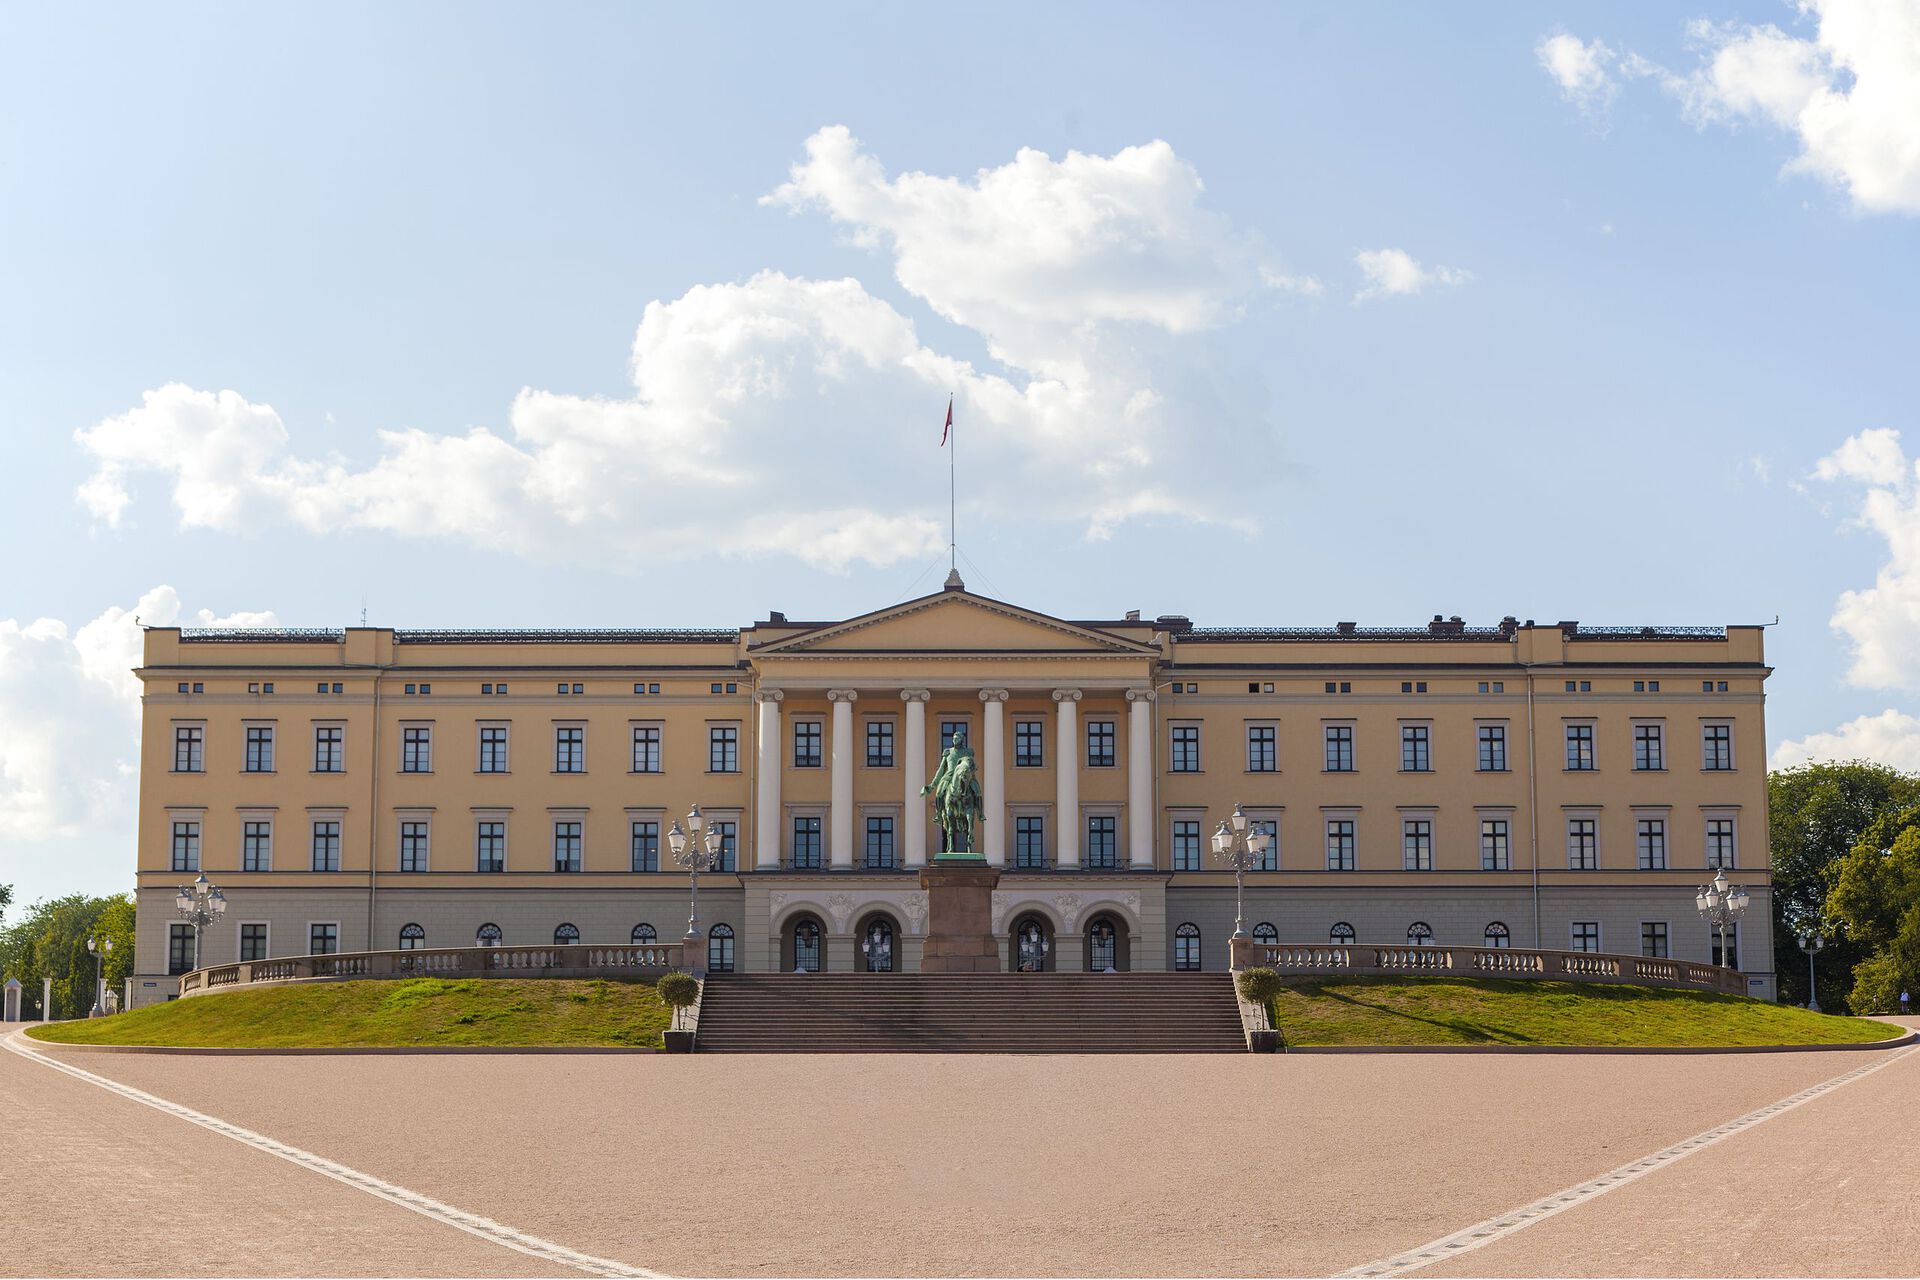 photo of the royal palace in Oslo 